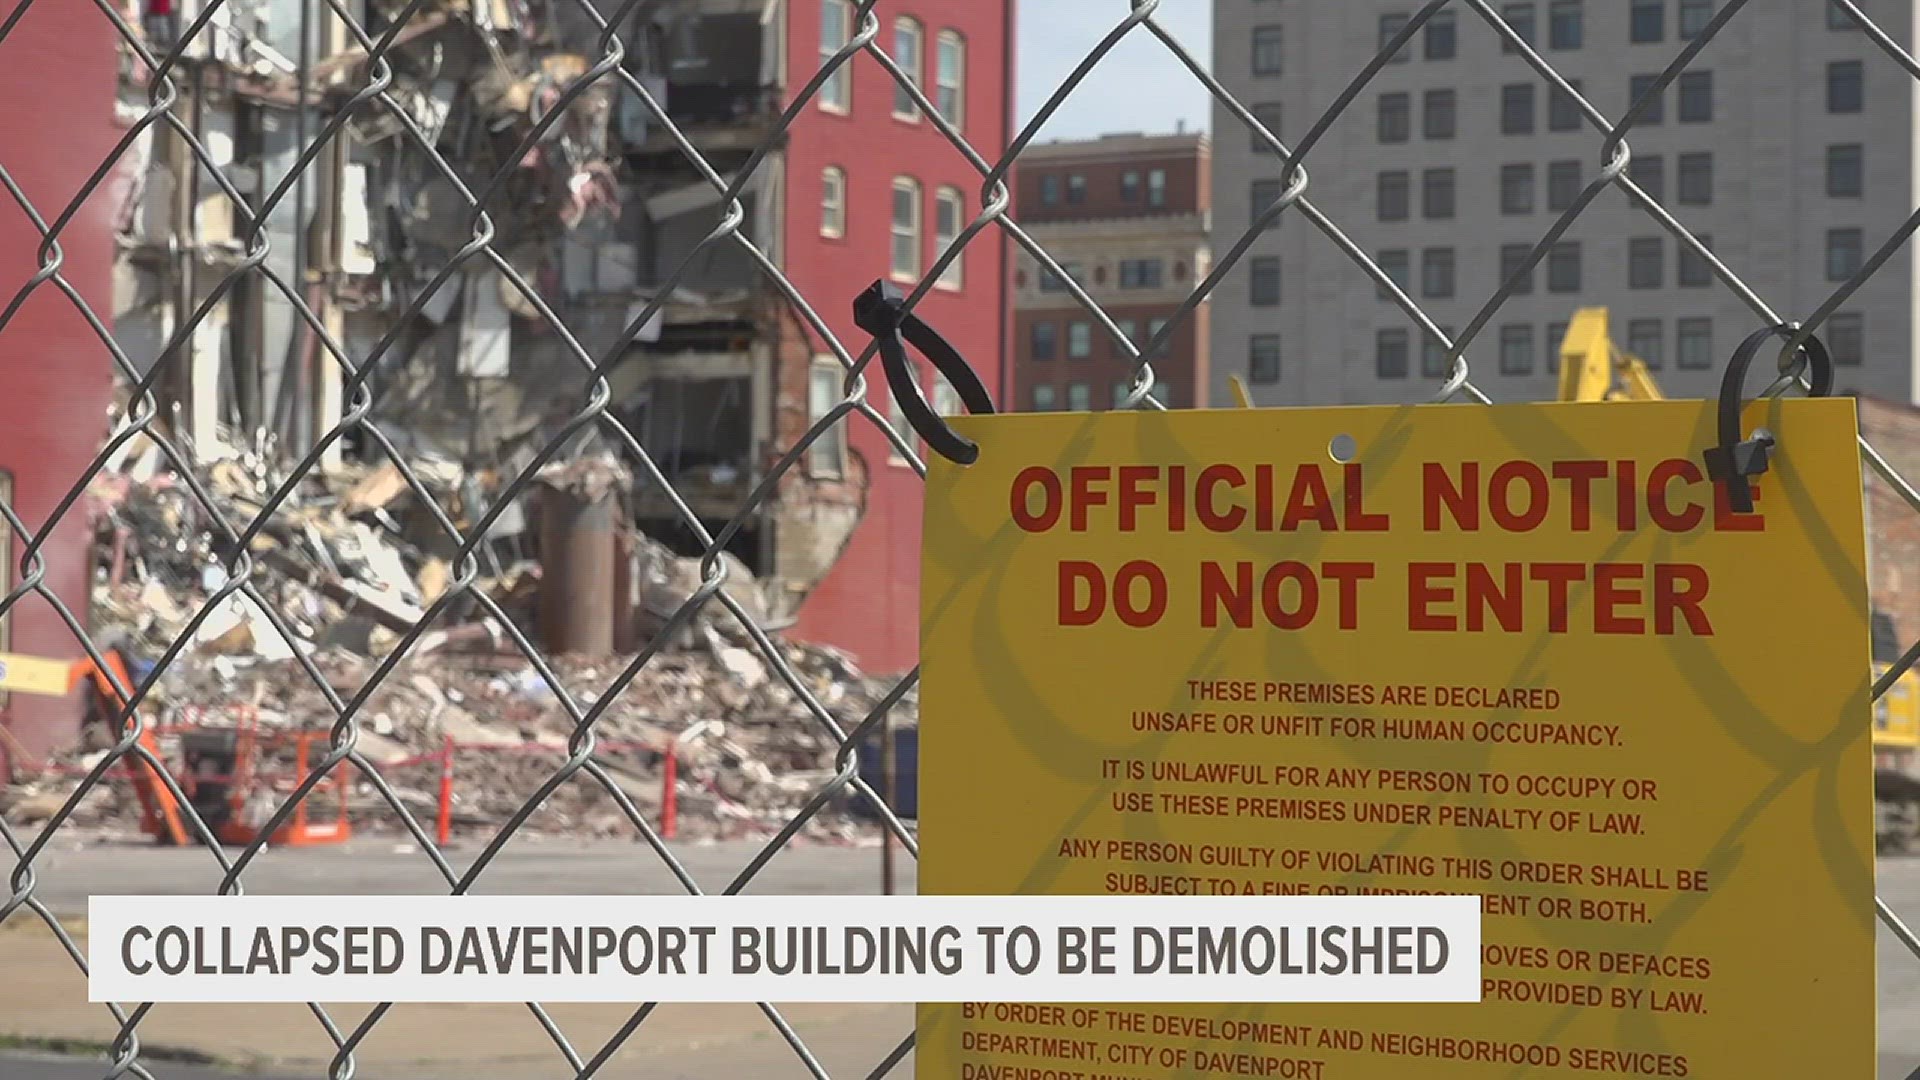 Residents of the building that partially collapsed on May 28 cannot return to collect their belongings, as the city deemed it unsafe and plans to demolish it.